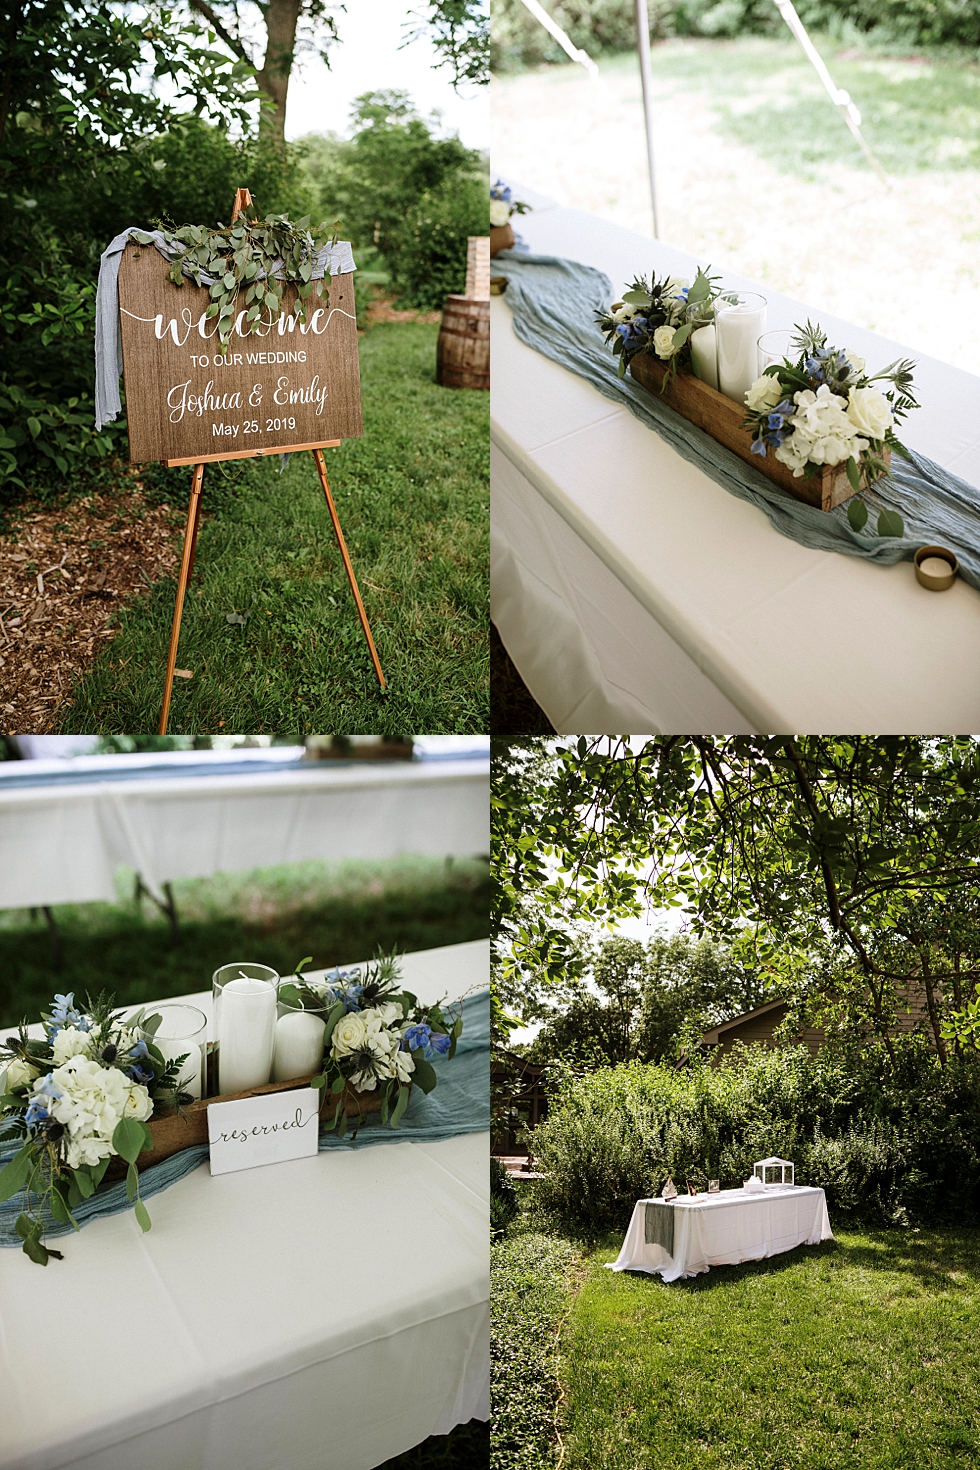  Dreamy outdoor wedding reception for this southern spring wedding at Locust Grove in Louisville Kentucky. spring wedding reception Locust Grove Louisville photographer Kentucky wedding photography by Lauren outdoor wedding bride and groom welcome si